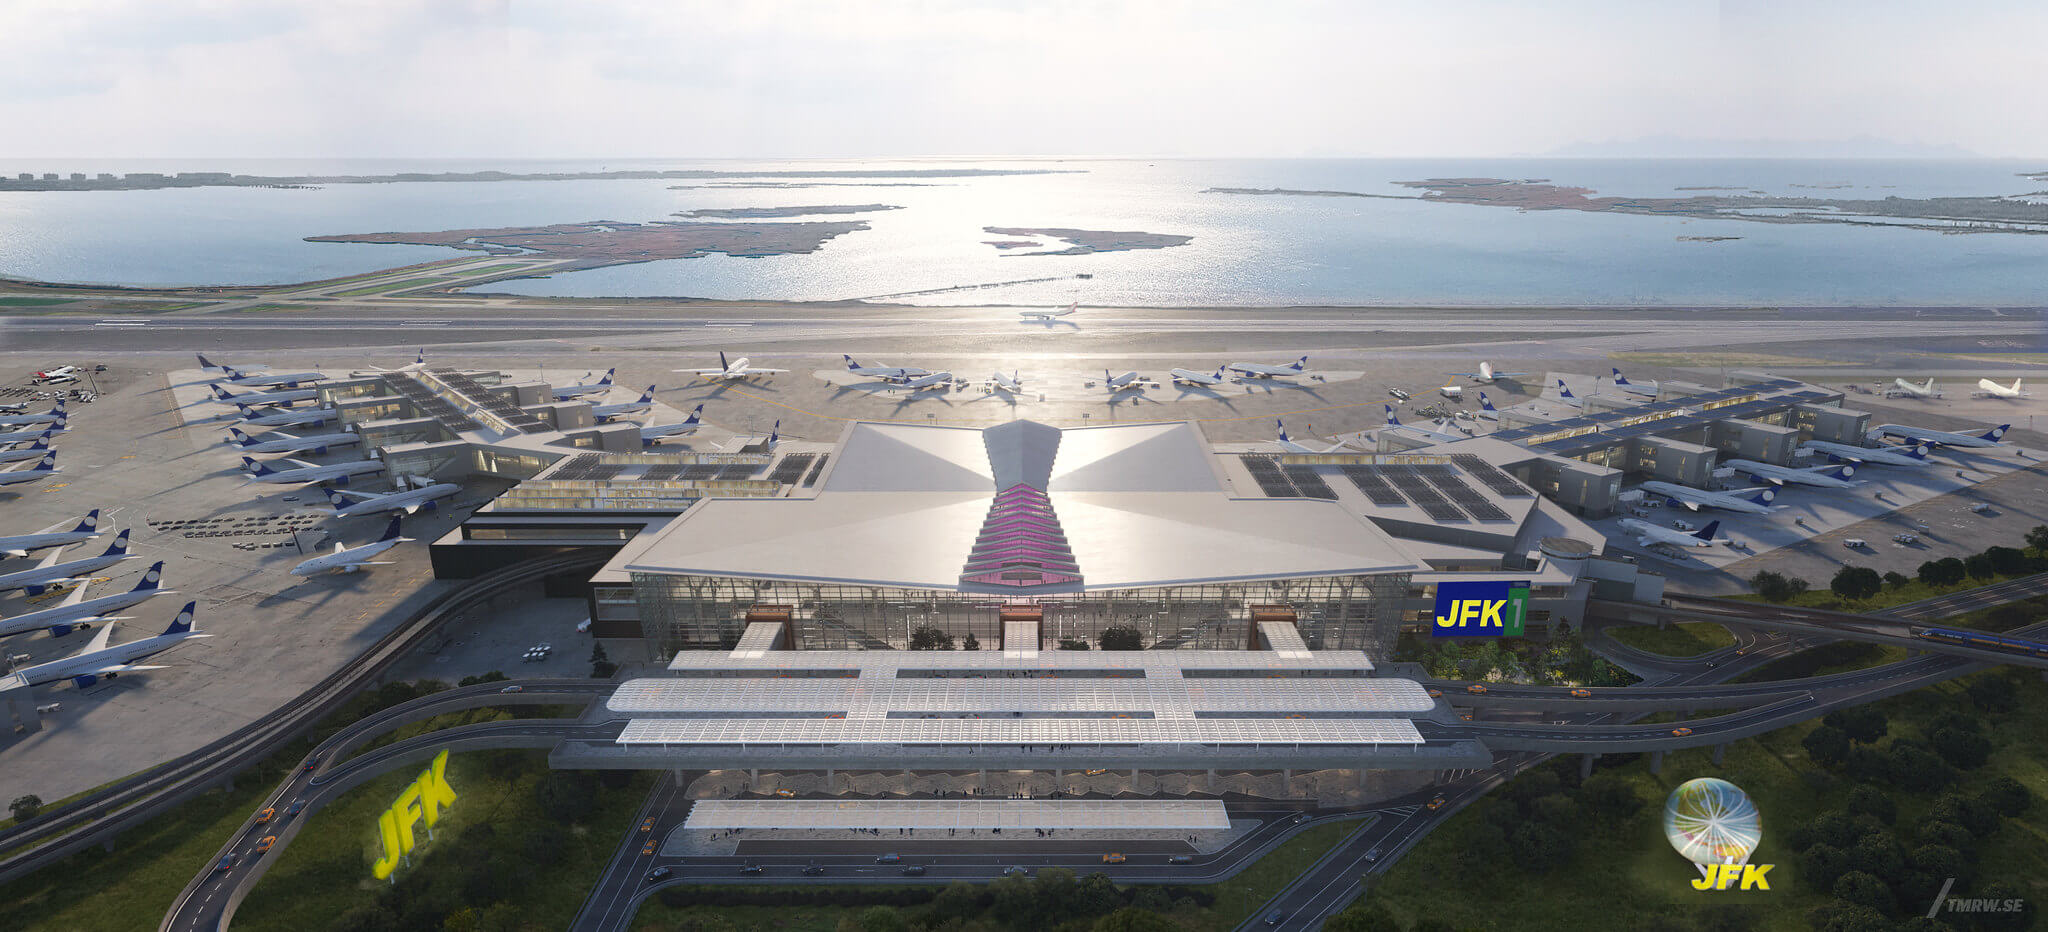 aerial rendering of an airport terminal at jfk international airport with a big sign